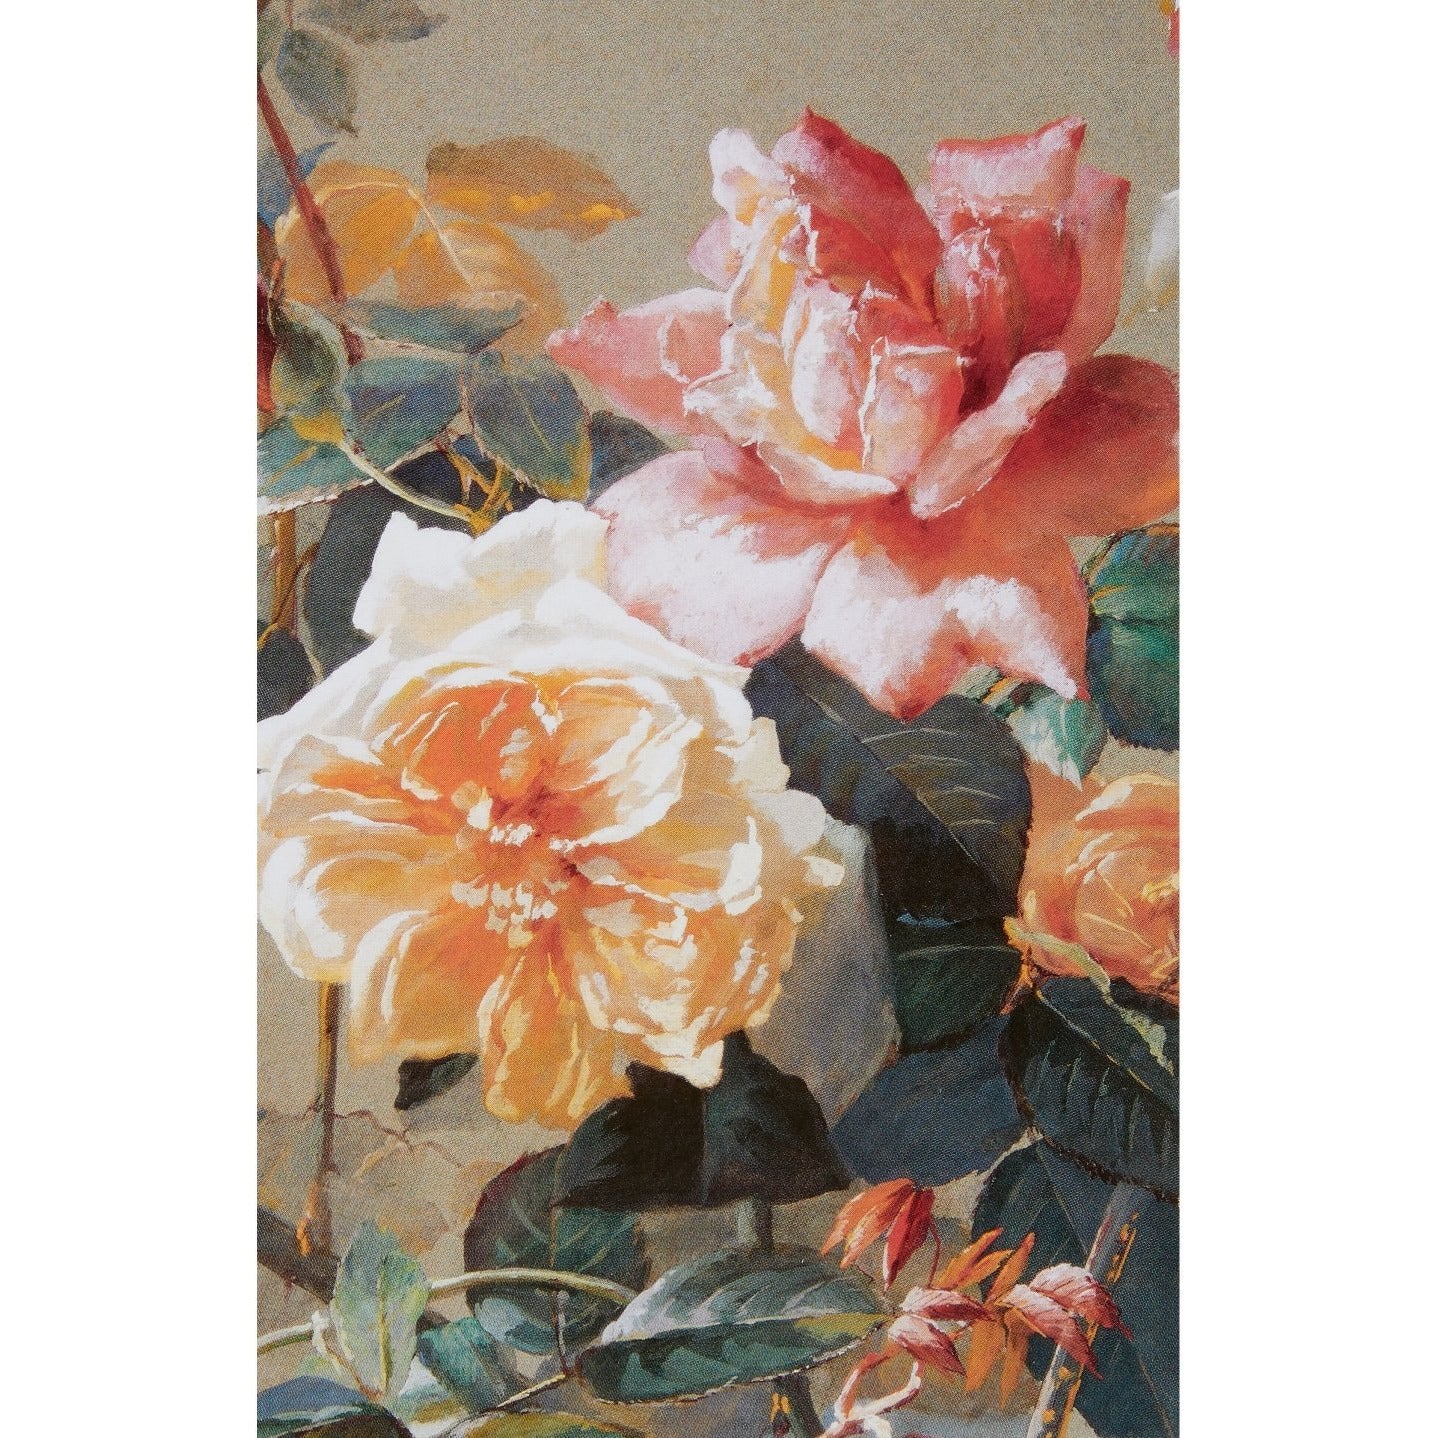 Notecard - Climbing tea roses and a humming bird (detail) by W. Mussilla. From the Broughton Collection of the Fitzwilliam Museum, brought to you by CuratingCambridge.co.uk